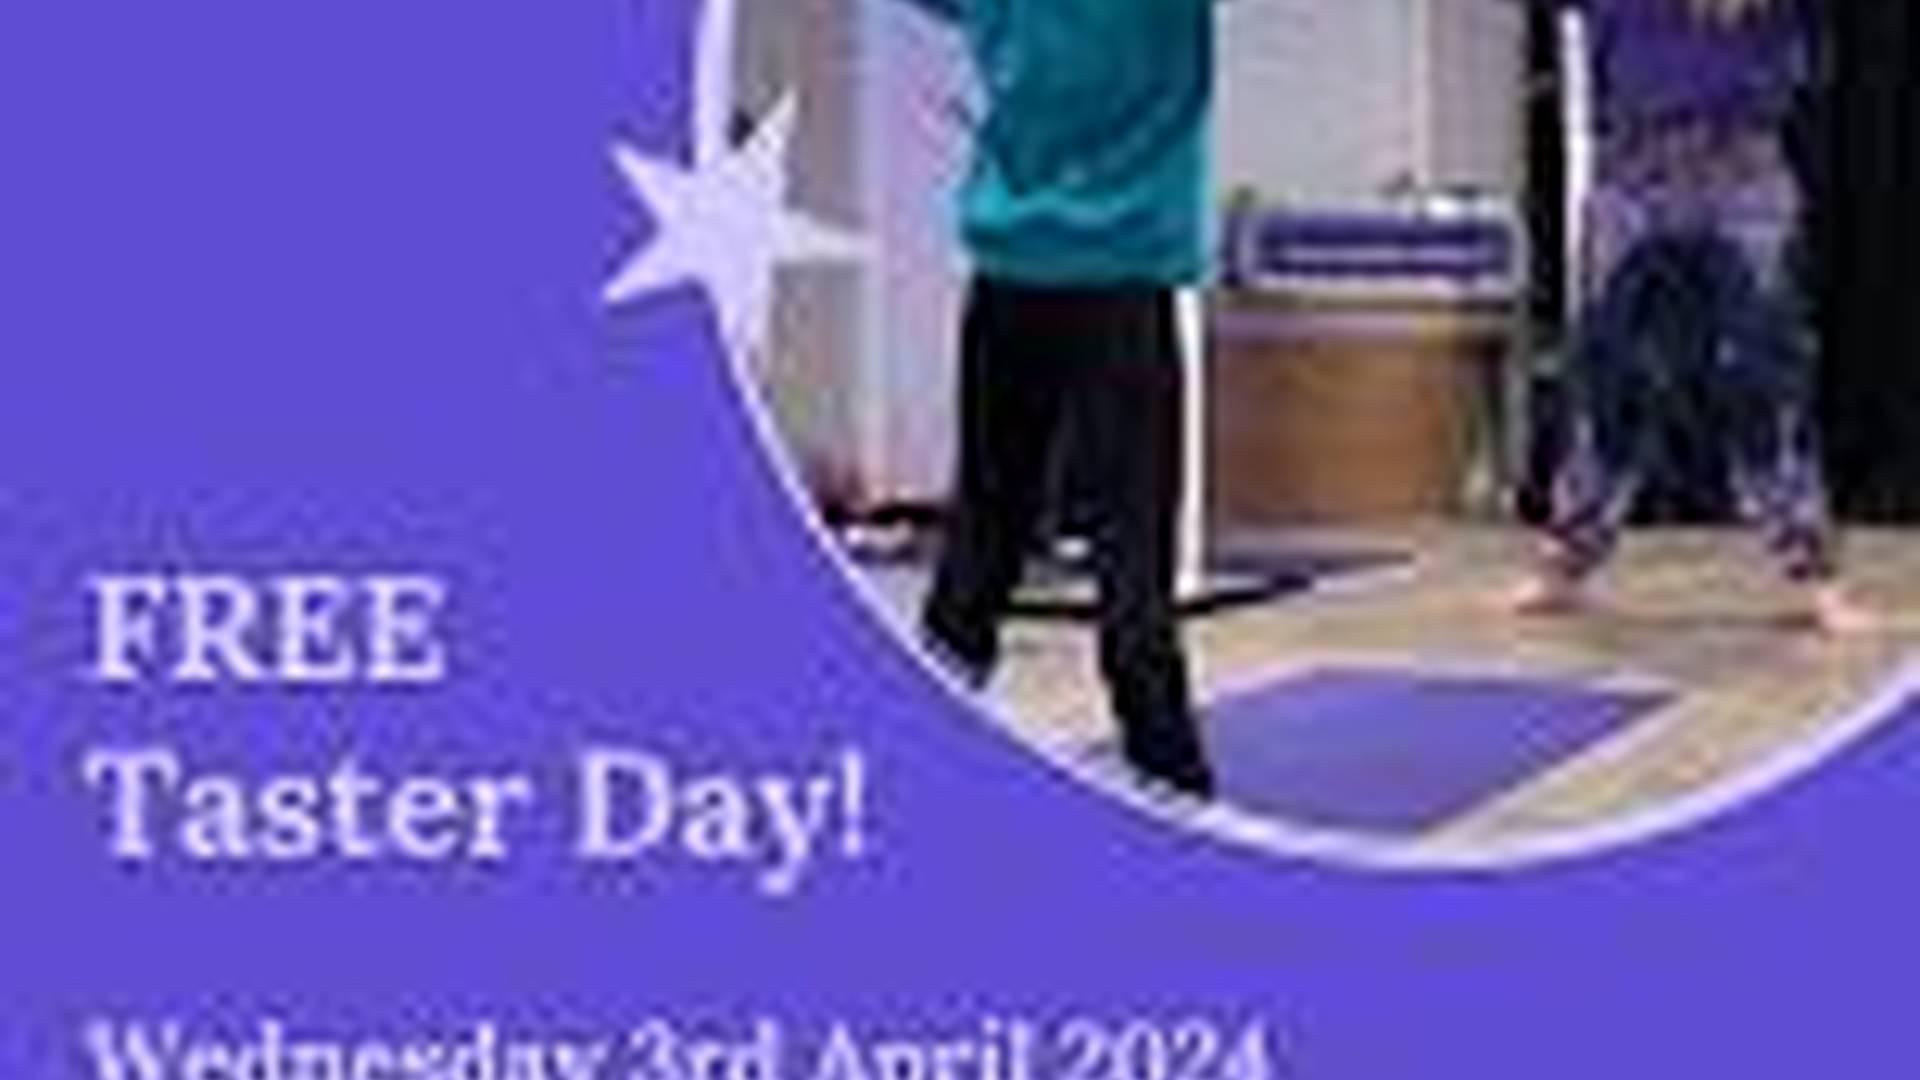 Well-being Wednesday – Free Taster Day photo